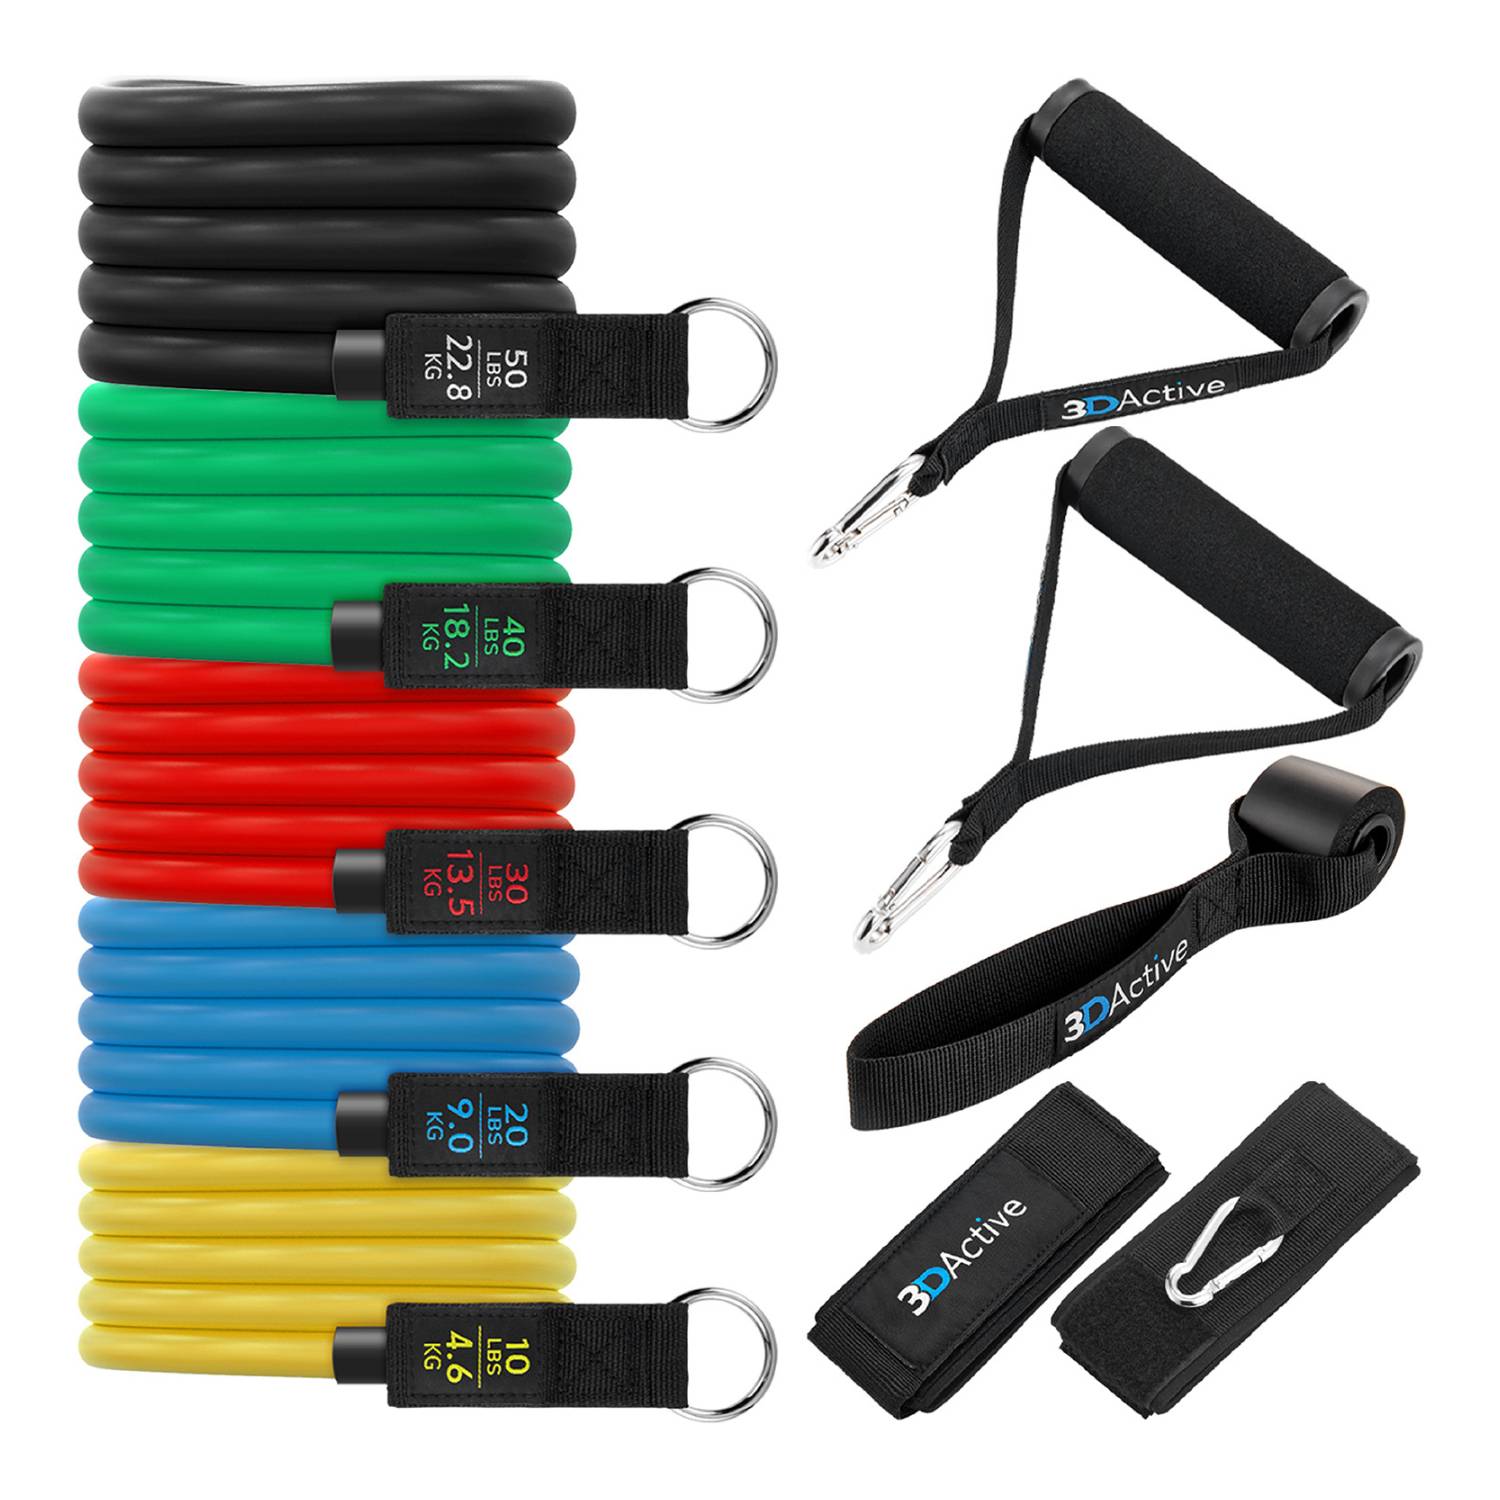 Bodylastics Resistance Band Set - Resistance Bands with Handles, Ankle  Straps, Door Anchor, Carry Bag - Heavy-Duty Stretch Exercise Bands  -Patented